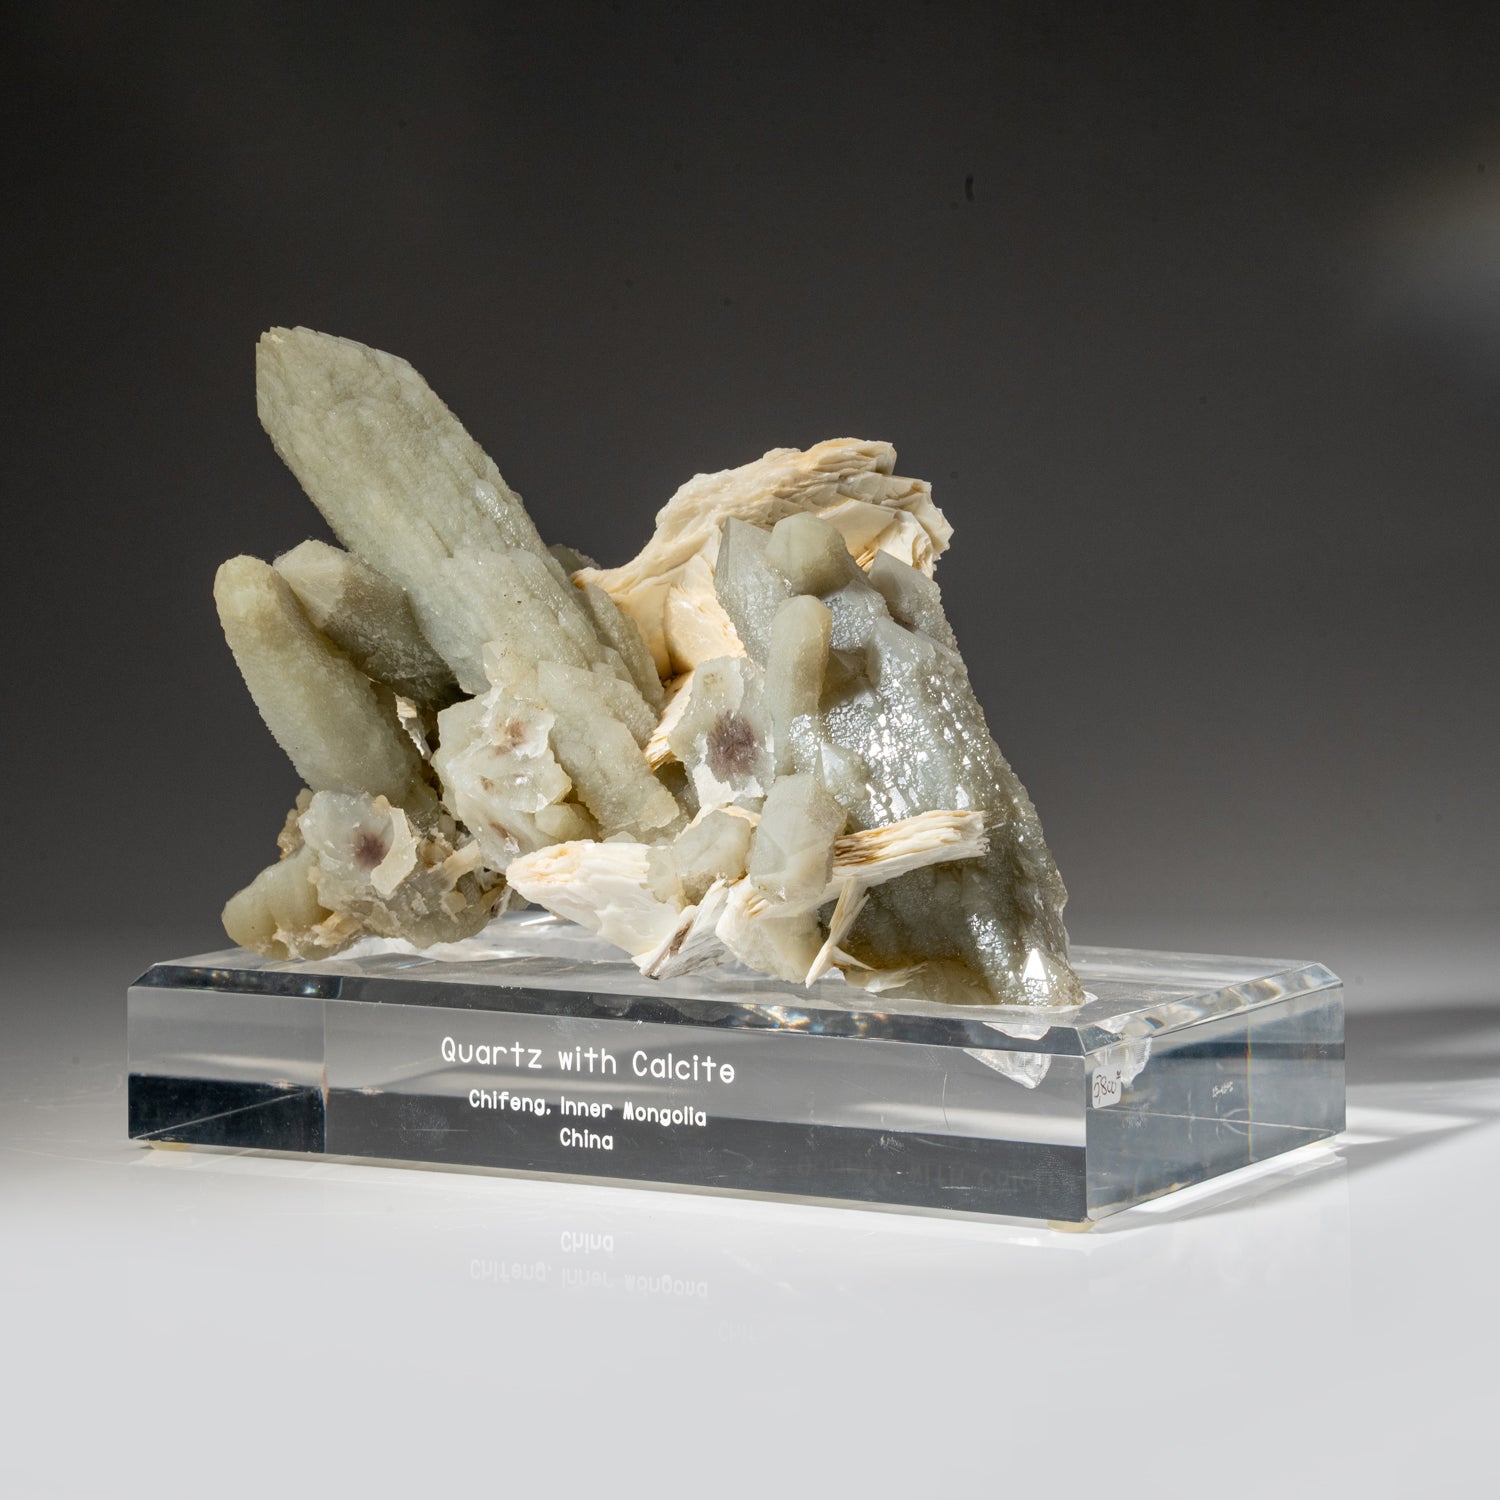 Quartz with Calcite from Chifeng, Inner Mongolia, China